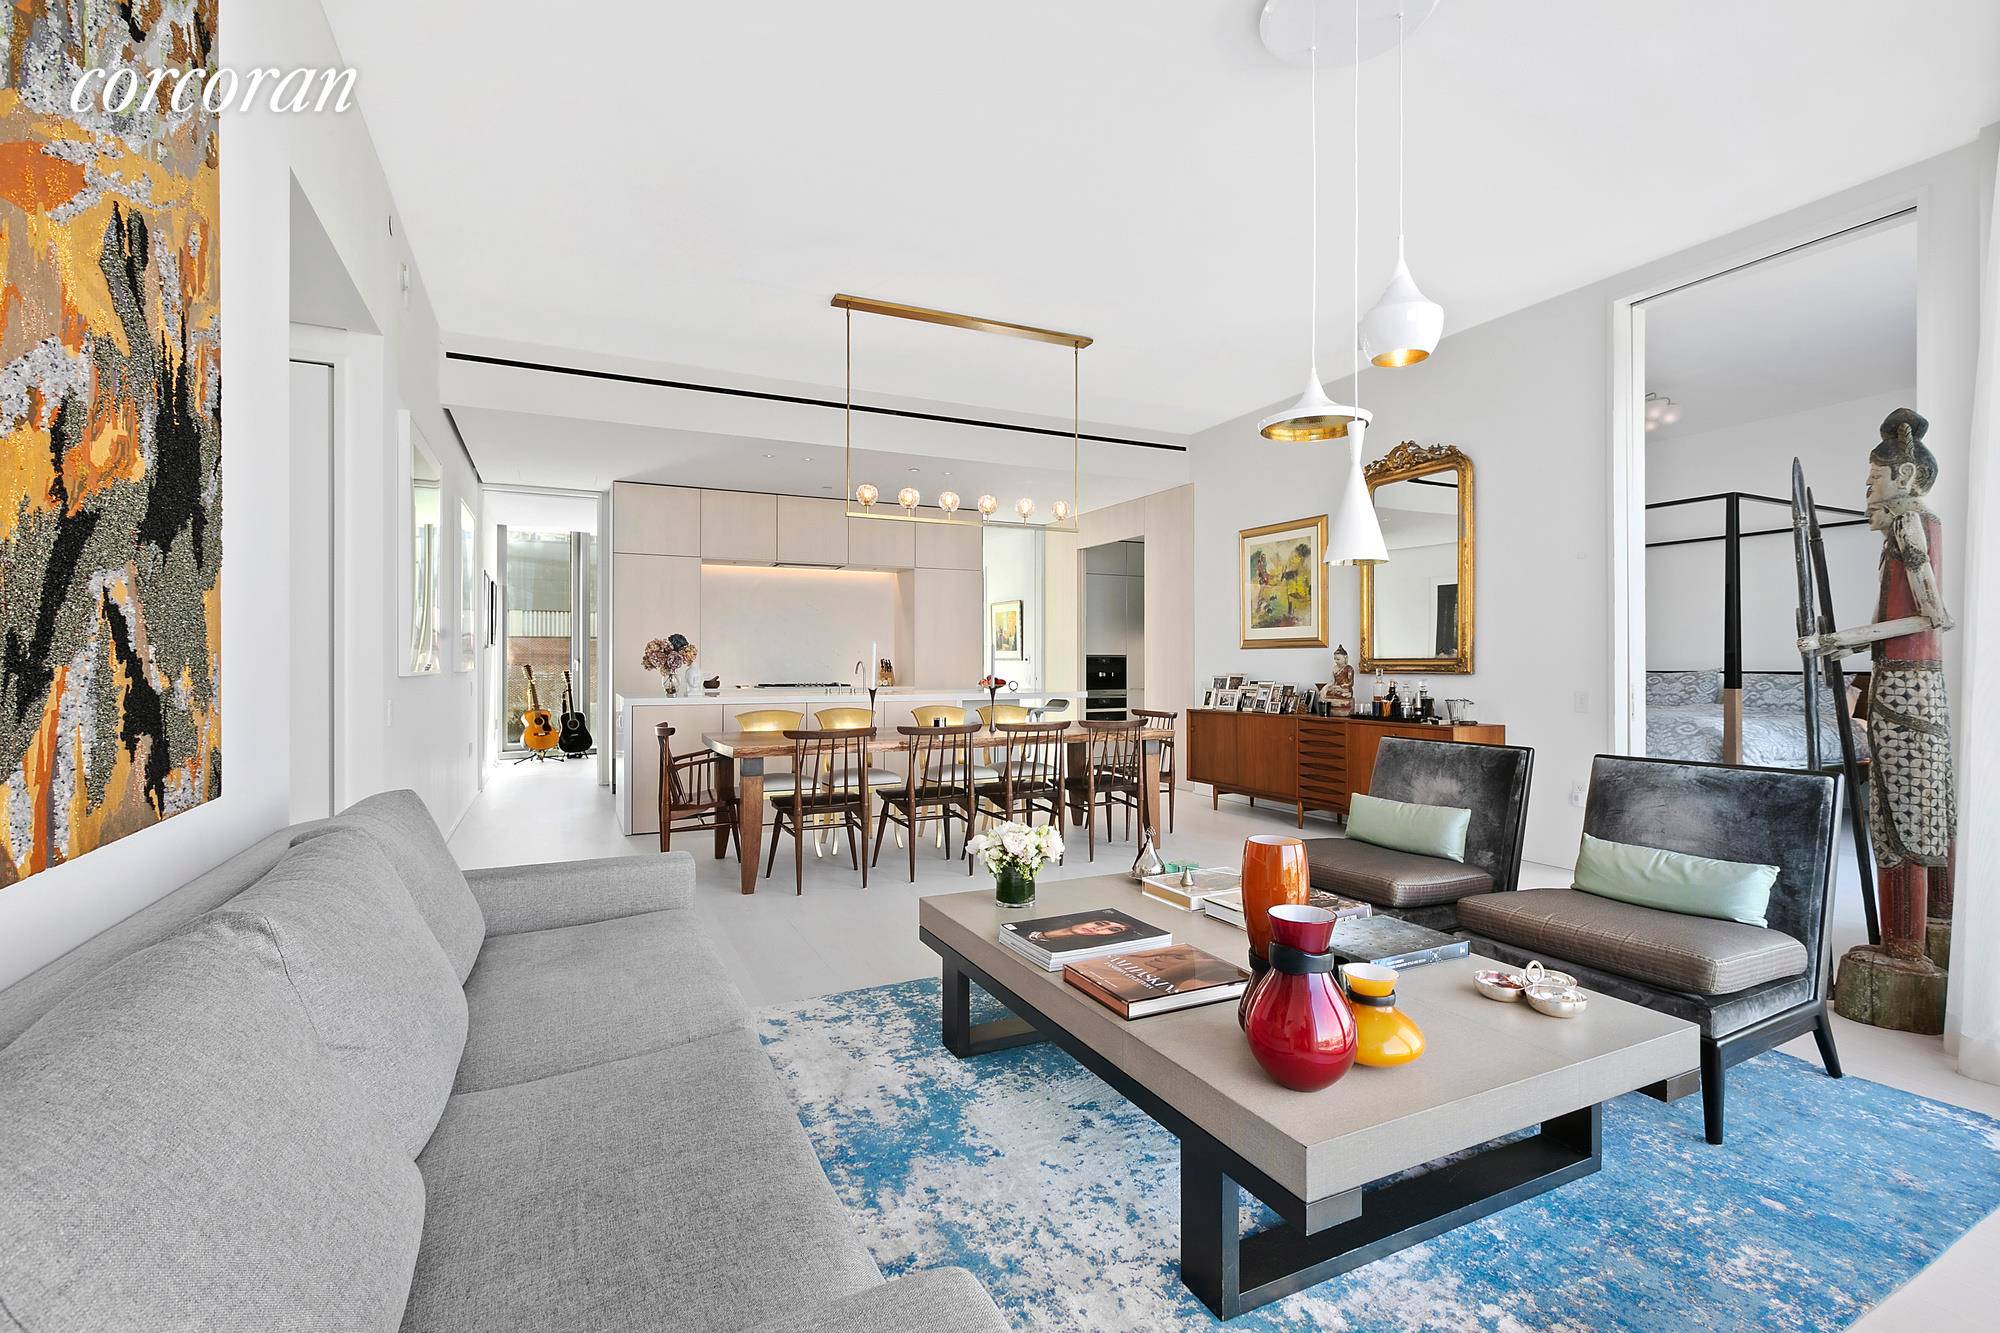 Situated along the Hudson River waterfront in the West Village, this stunning home is the one of a kind, inspired by a collaboration from renowned hotelier real estate developer, Ian ...